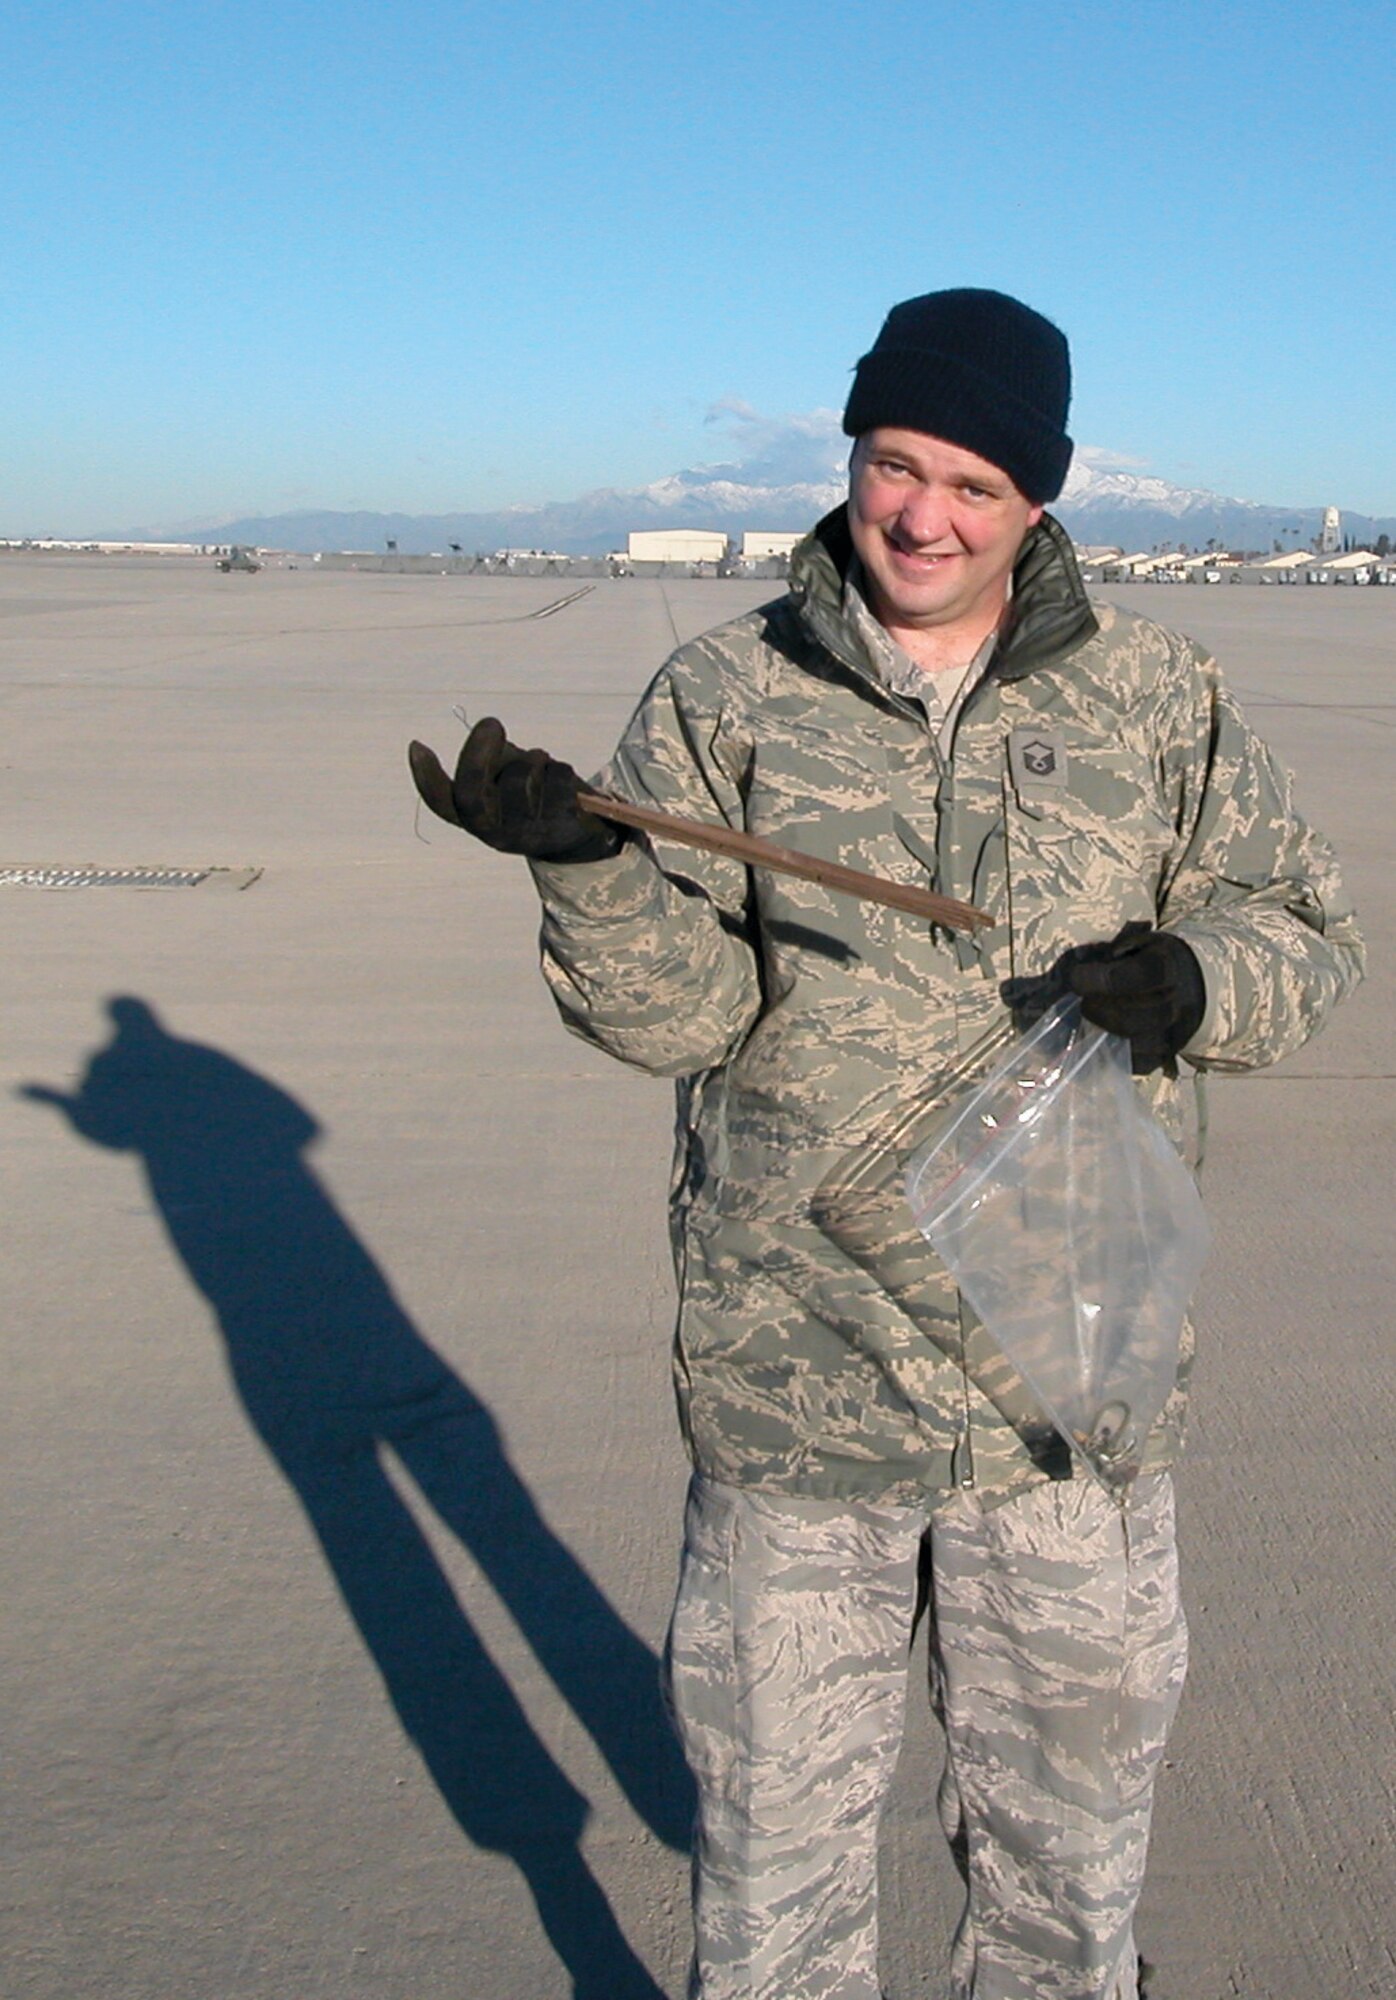 Master Sgt. Thomas Hackmann holds a long wood splinter he found on the ramp, Jan. 28. Pieces of wood are often carried onto the ramp area by fast moving water.   (U.S. Air Force photo by Megan Just)